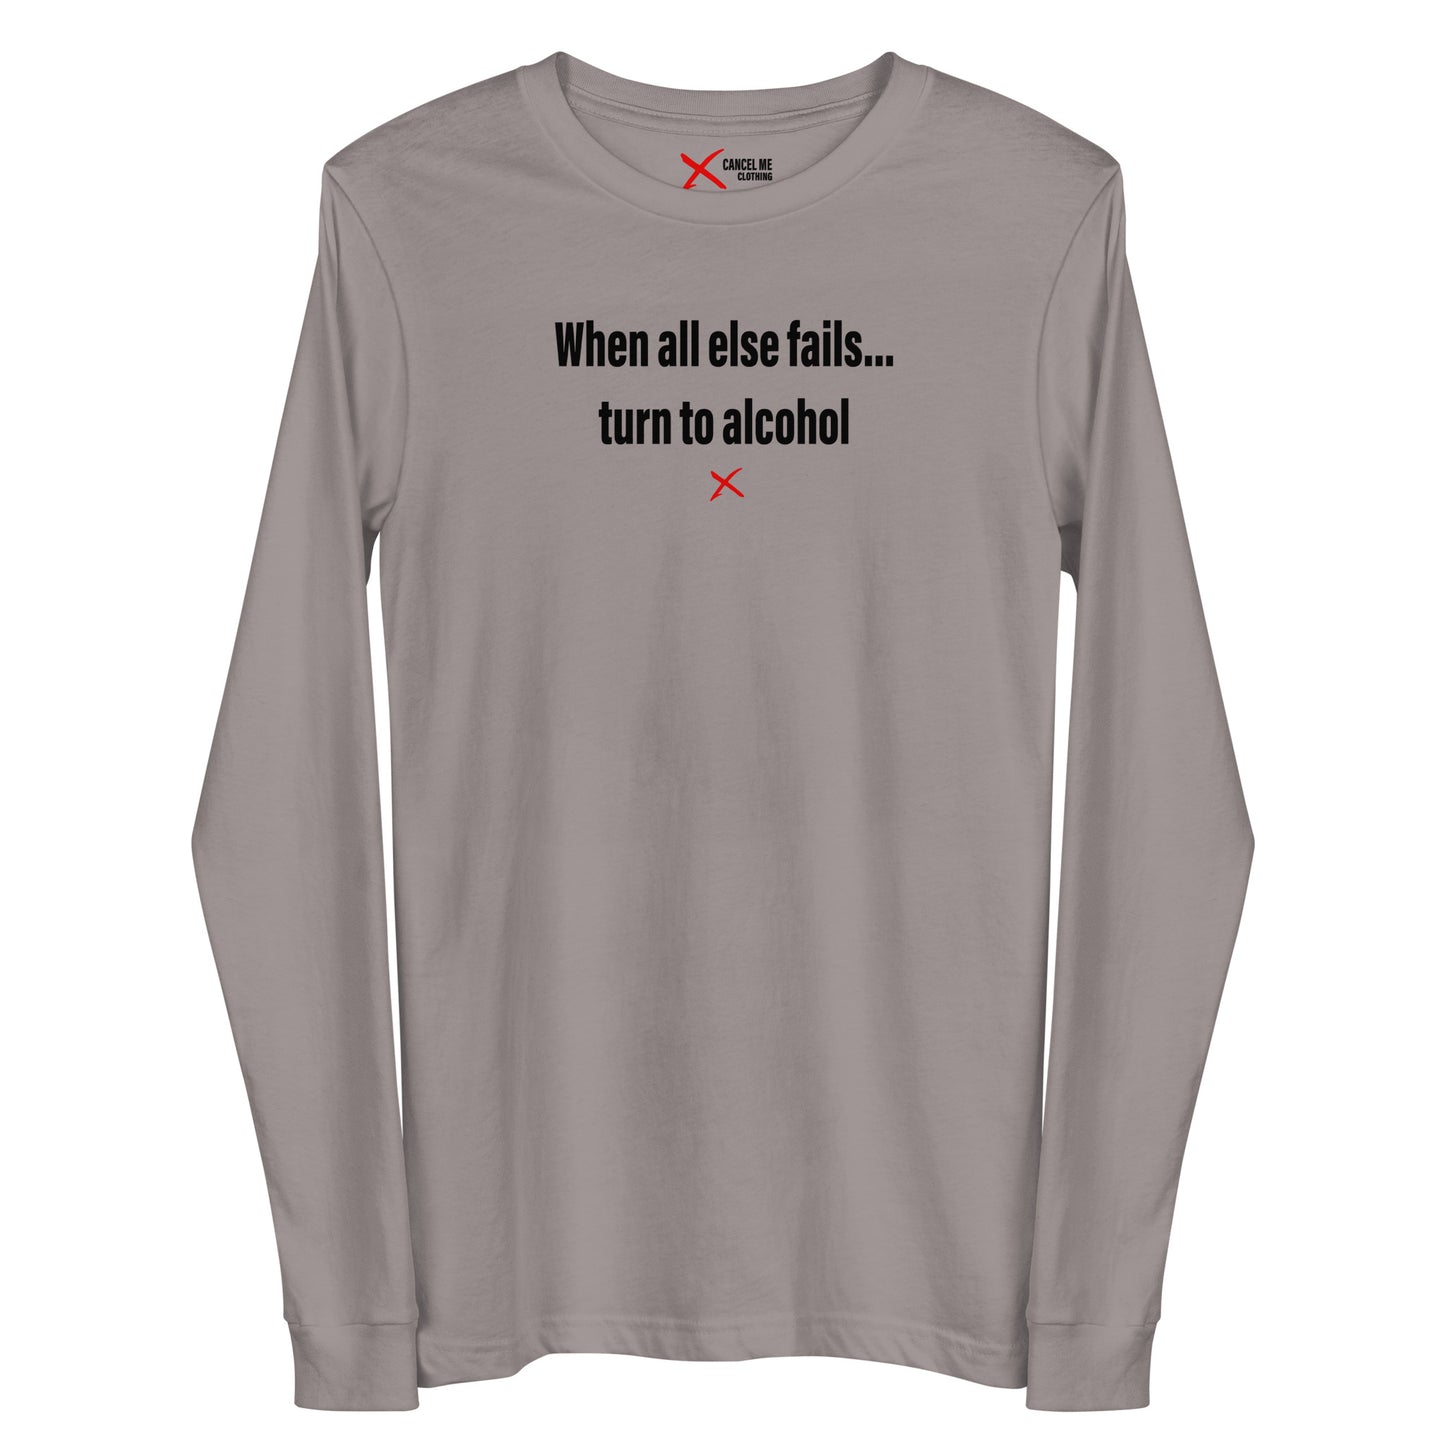 When all else fails... turn to alcohol - Longsleeve